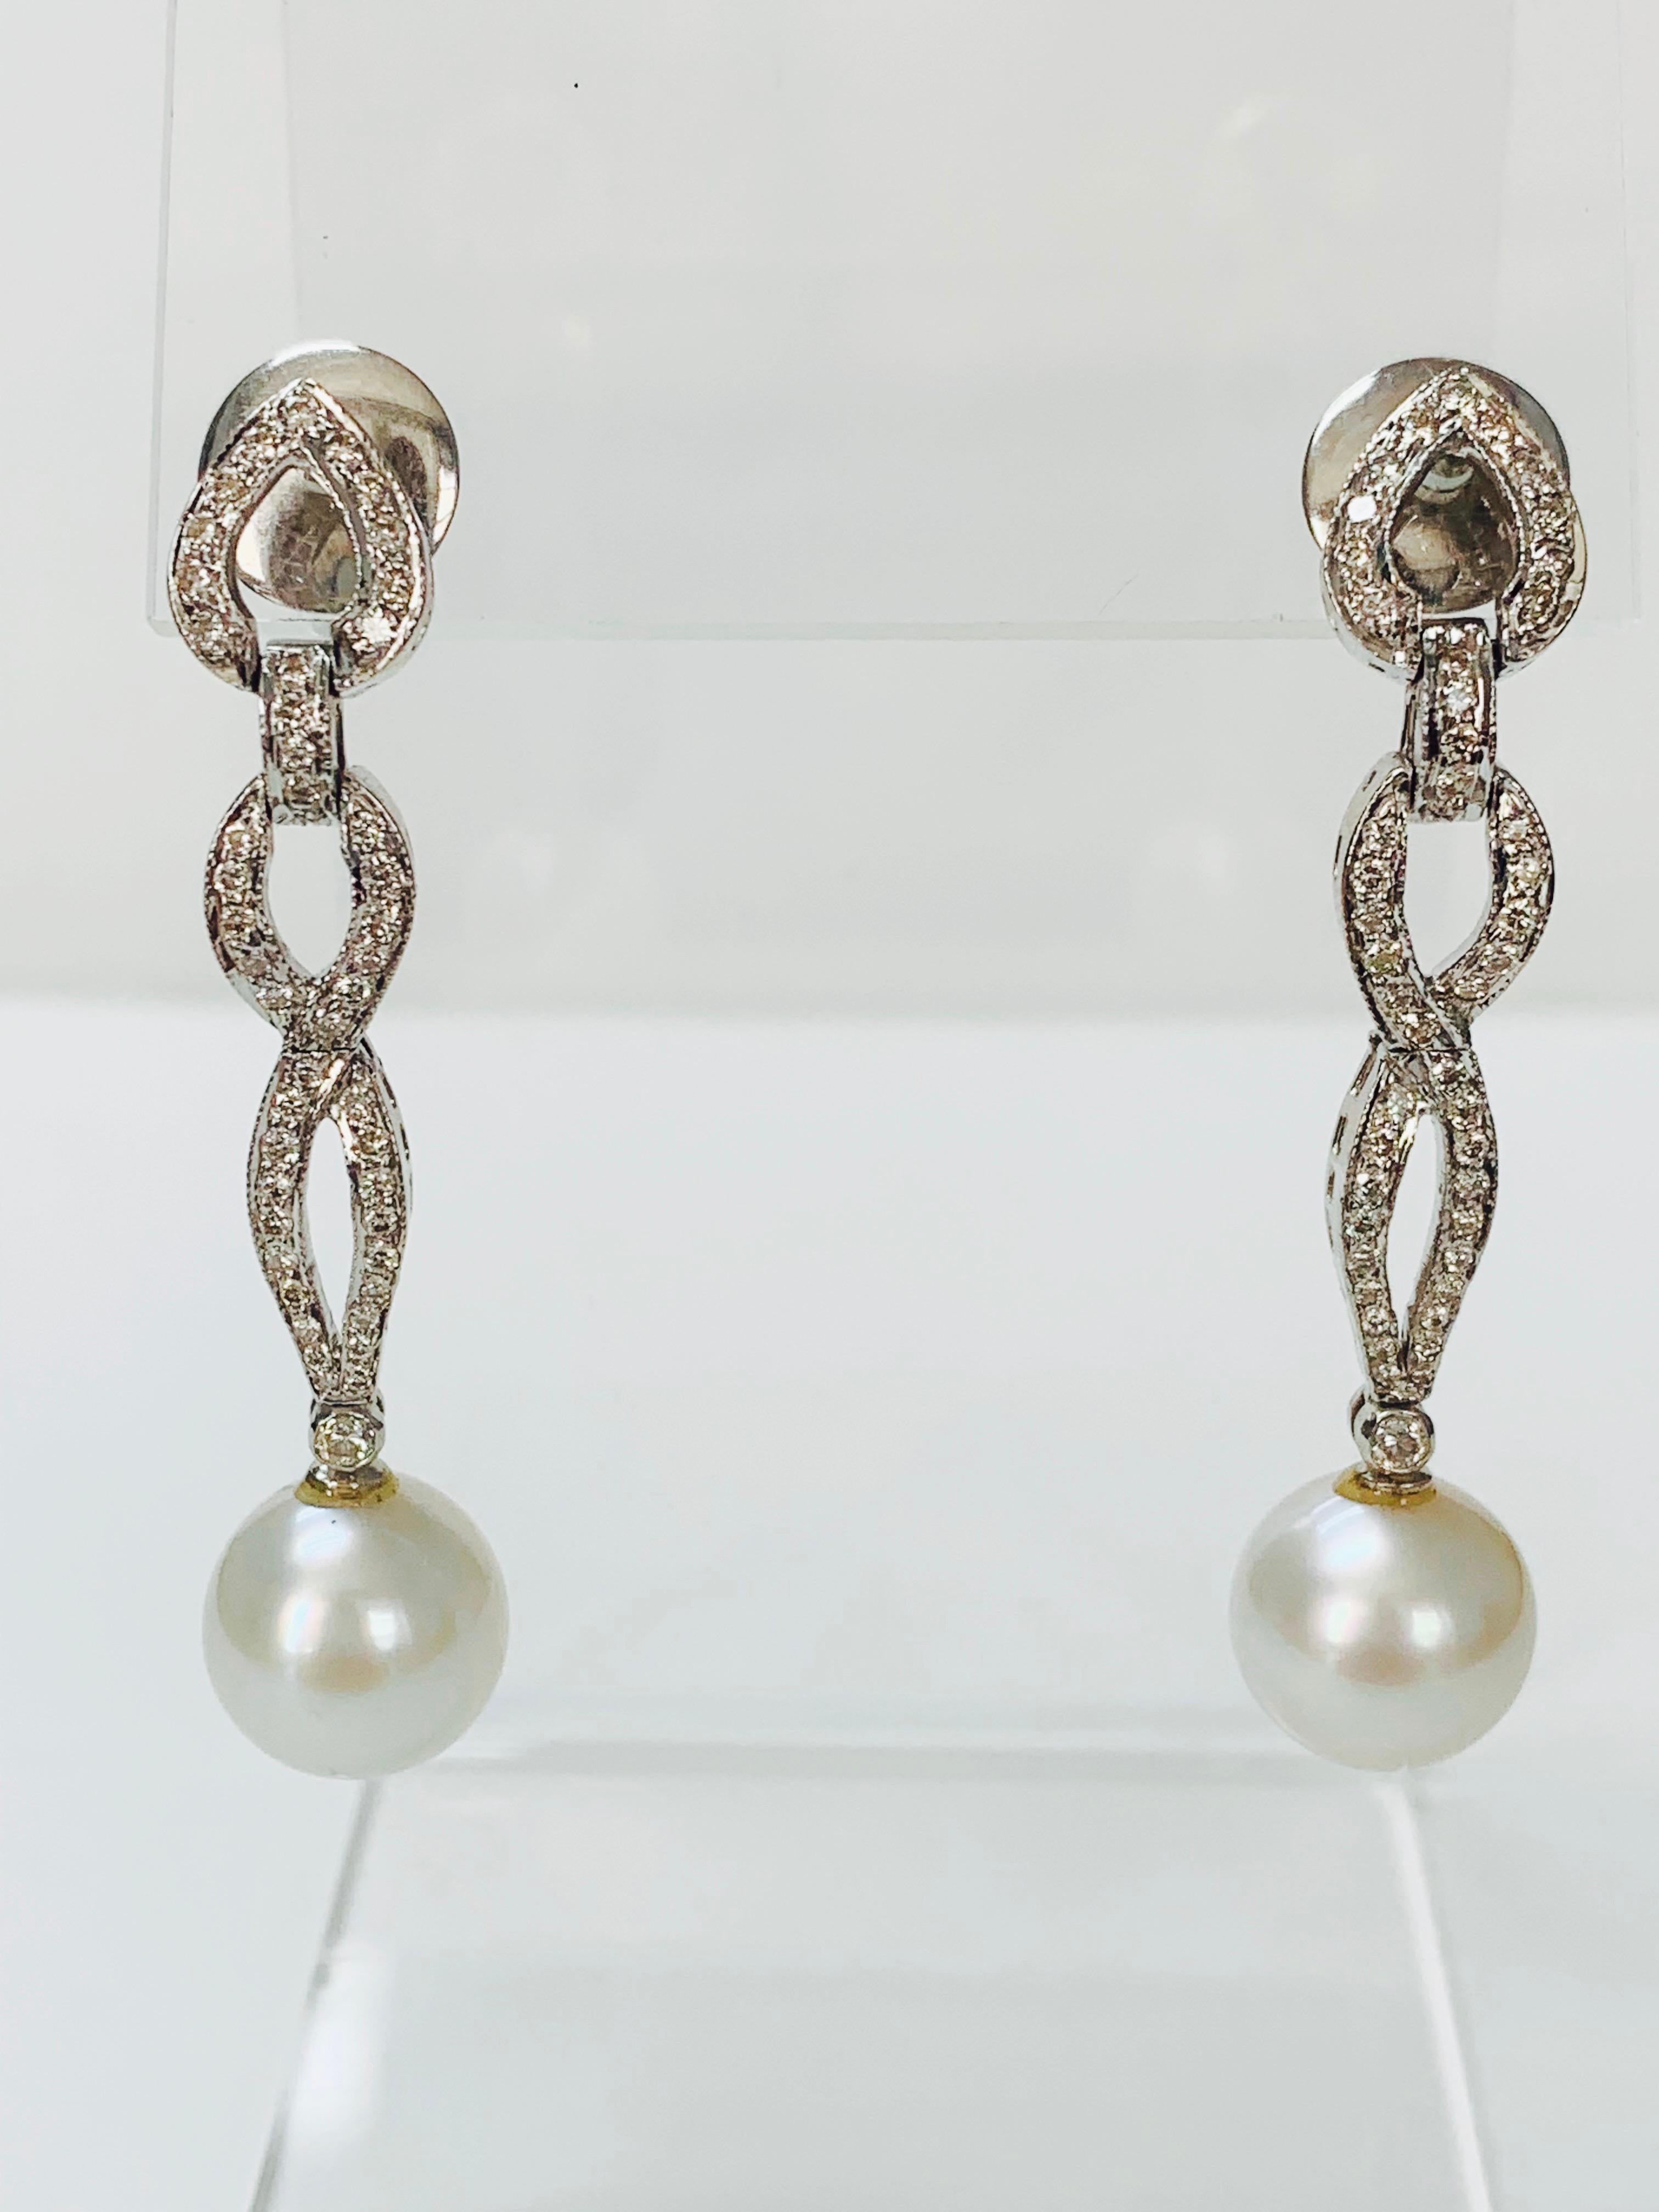 Diamond and South Sea Pearl Earrings in 18k White Gold For Sale 5